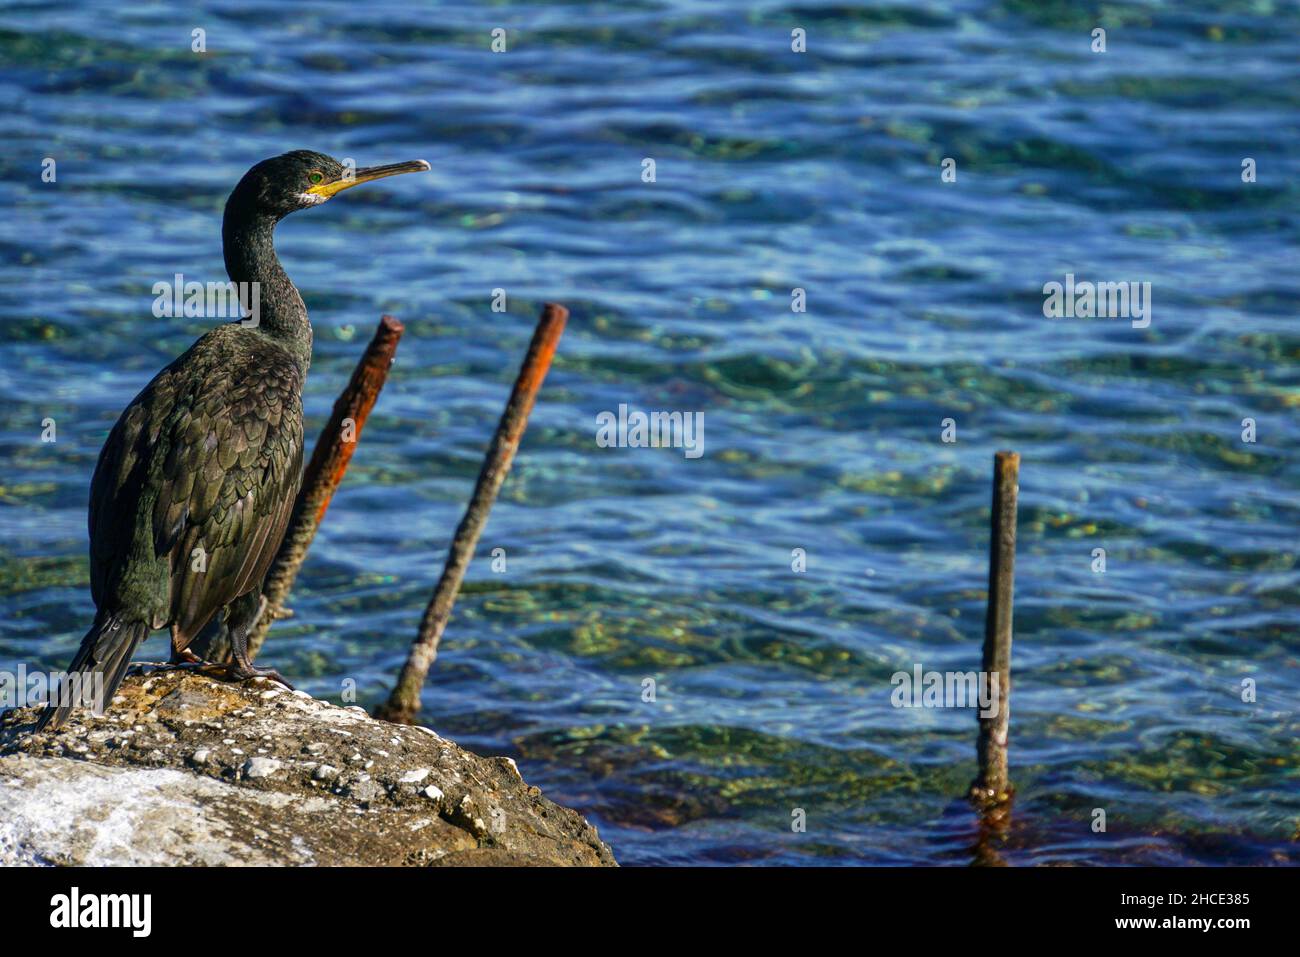 European shag or common shag (Phalacrocorax aristotelis) is a species of cormorant. It breeds around the rocky coasts of western and southern Europe, Stock Photo